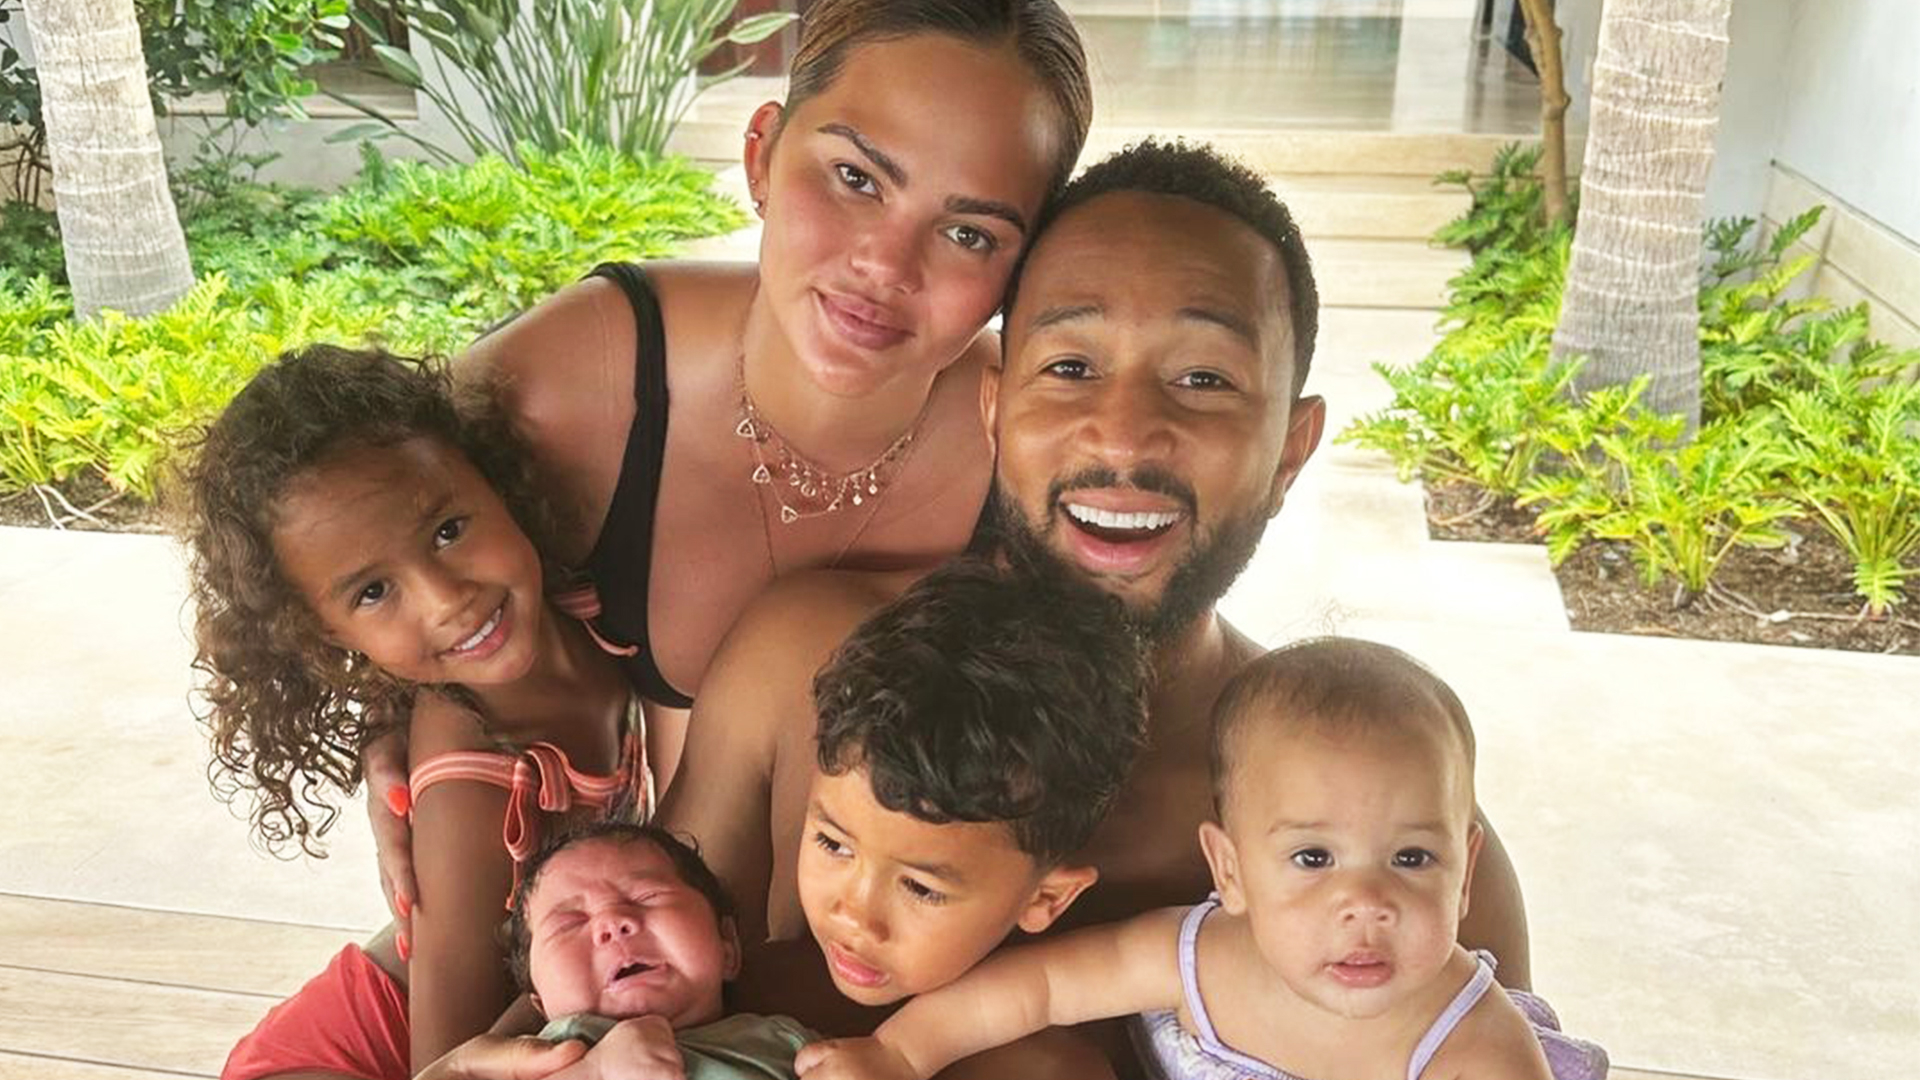 Chrissy Teigen Says Vow Renewal with John Legend Was 'Really Special